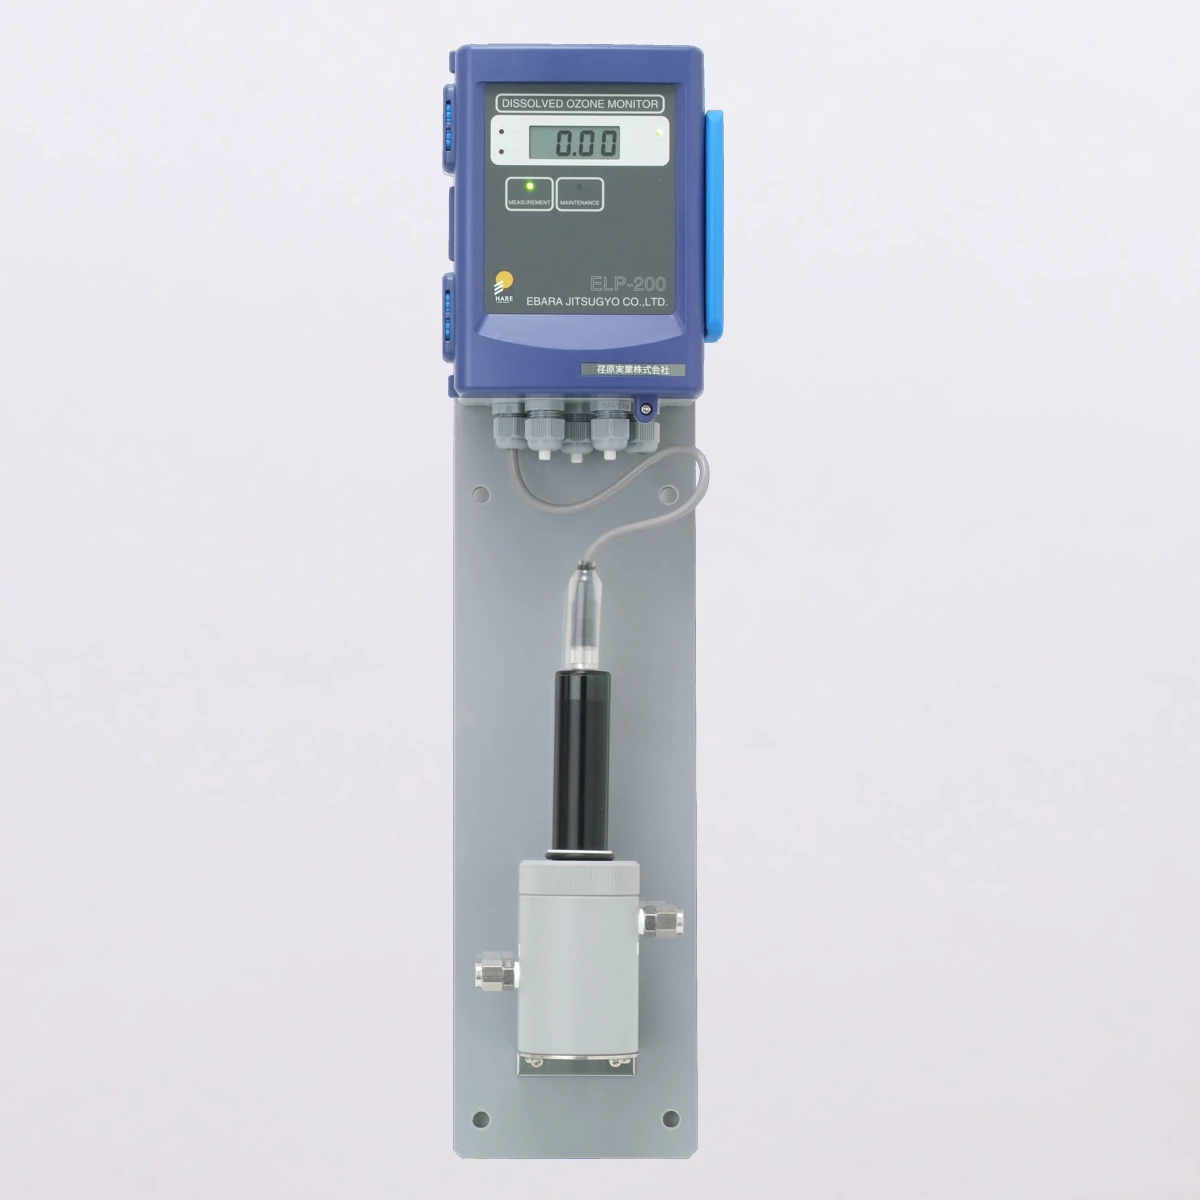 acniti dissolved ozone sensor for wastewater applications